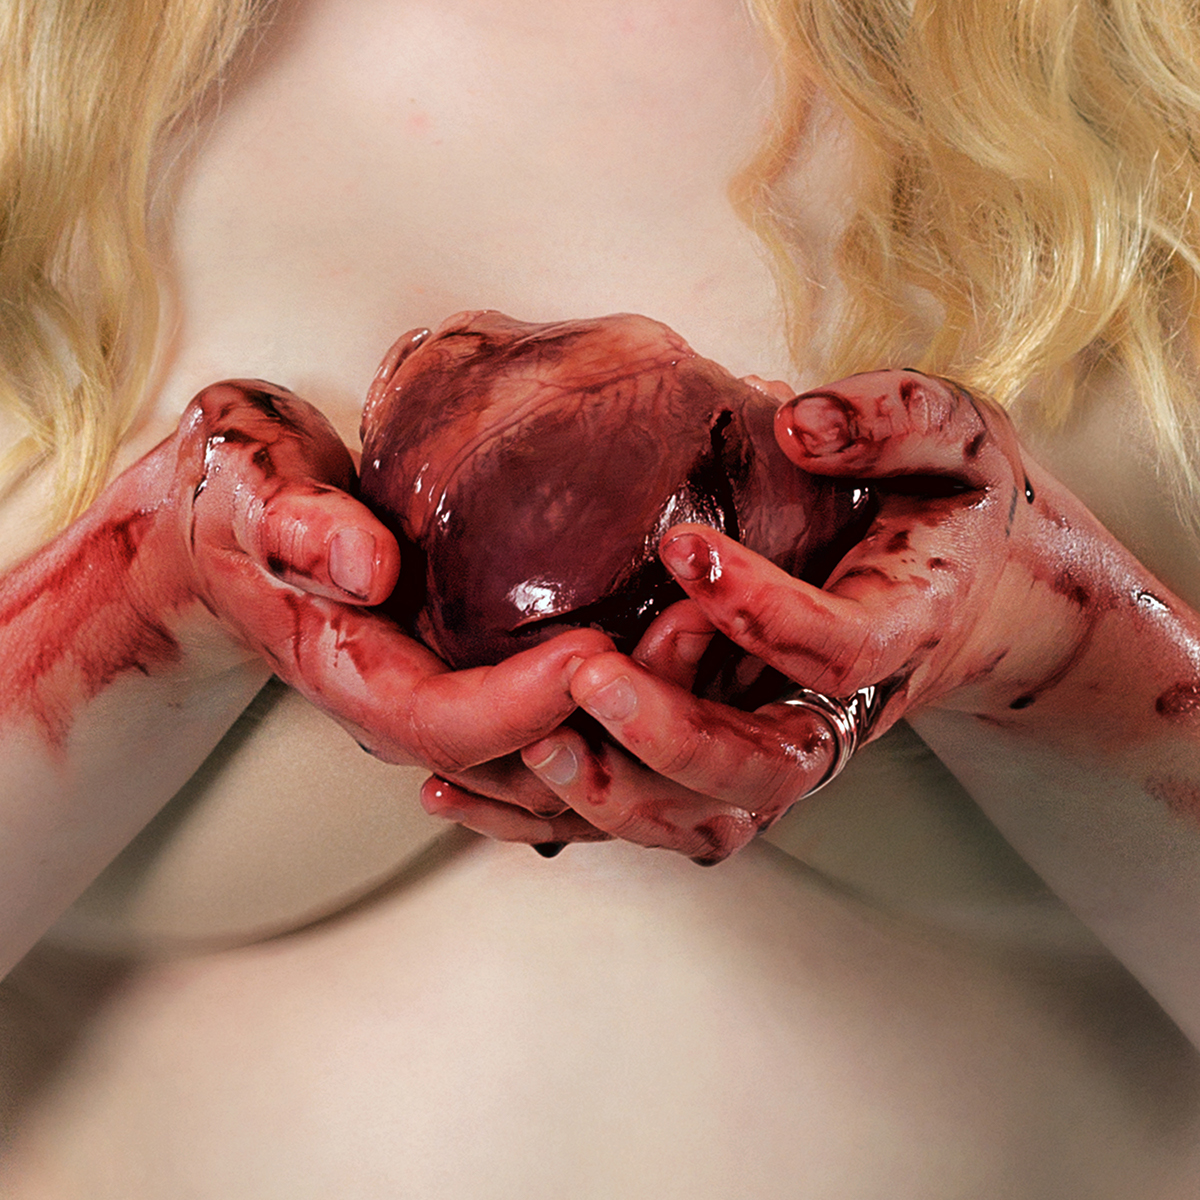 smoking nhs smokefree horror photography blood heart beauty Shockvertising   shock advertising campaign FMP final major project shock Stop Smoking Health